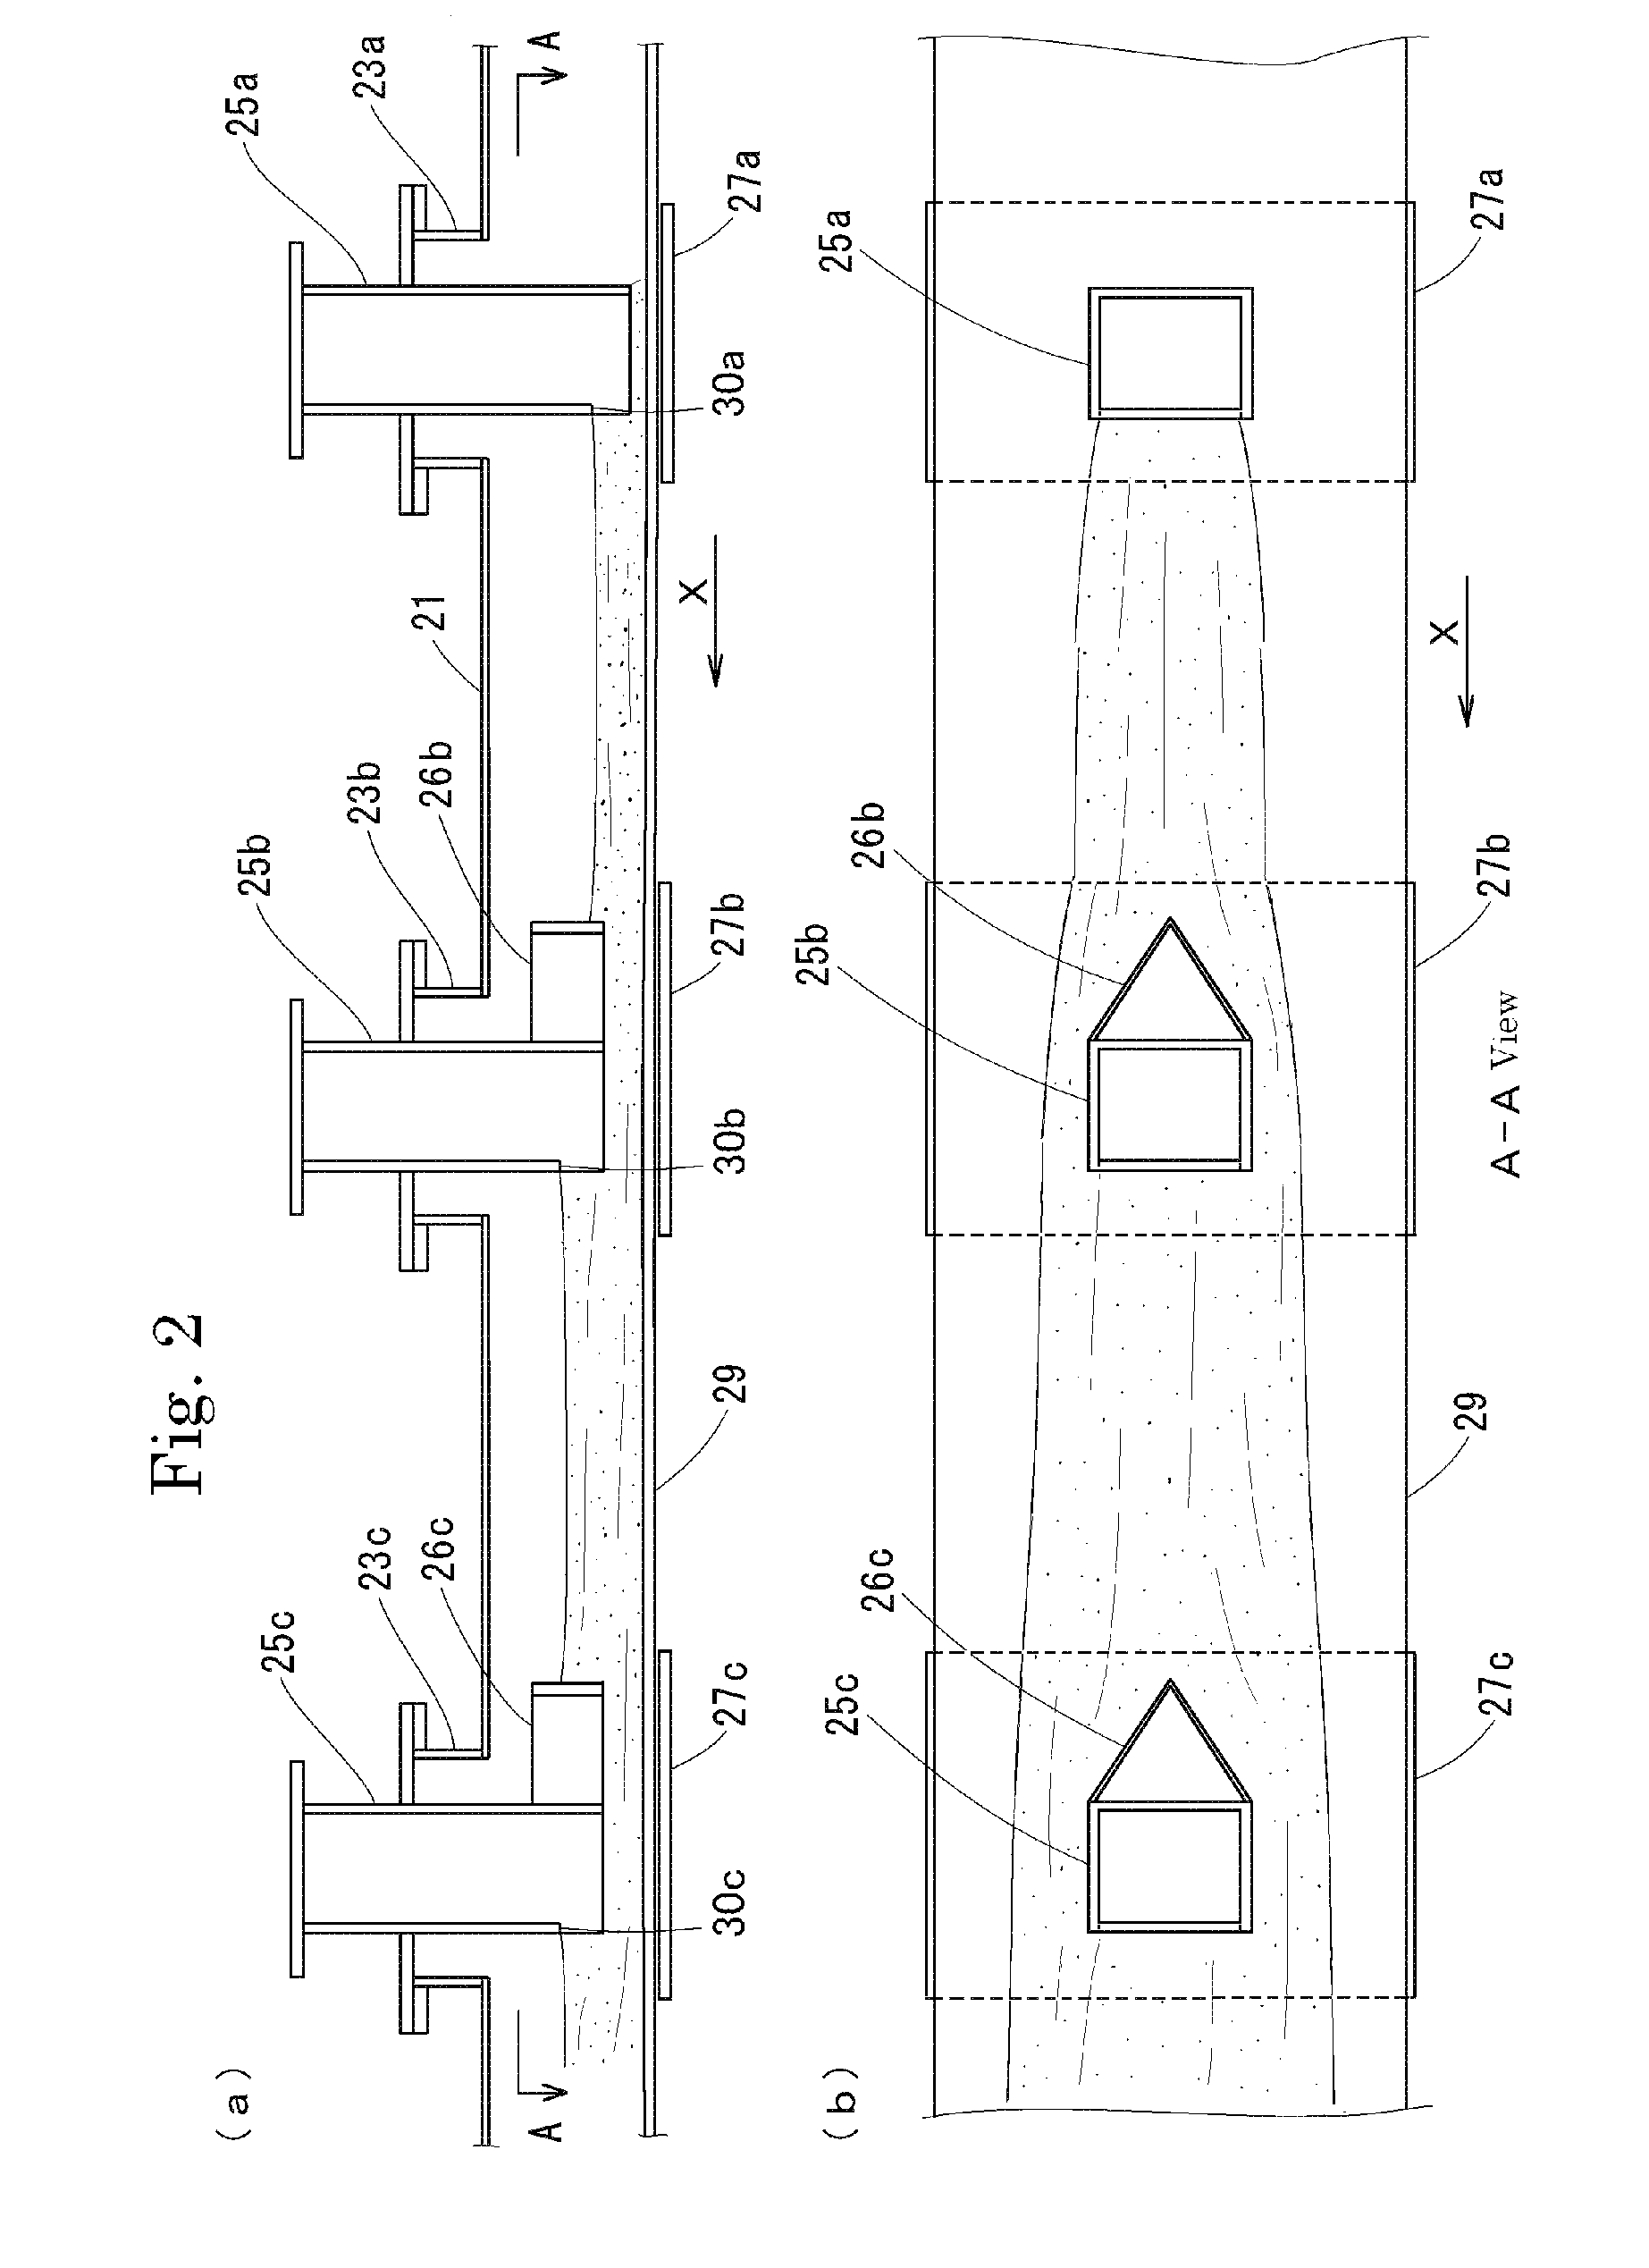 Equipment for discharging a fixed amount of a particulate body